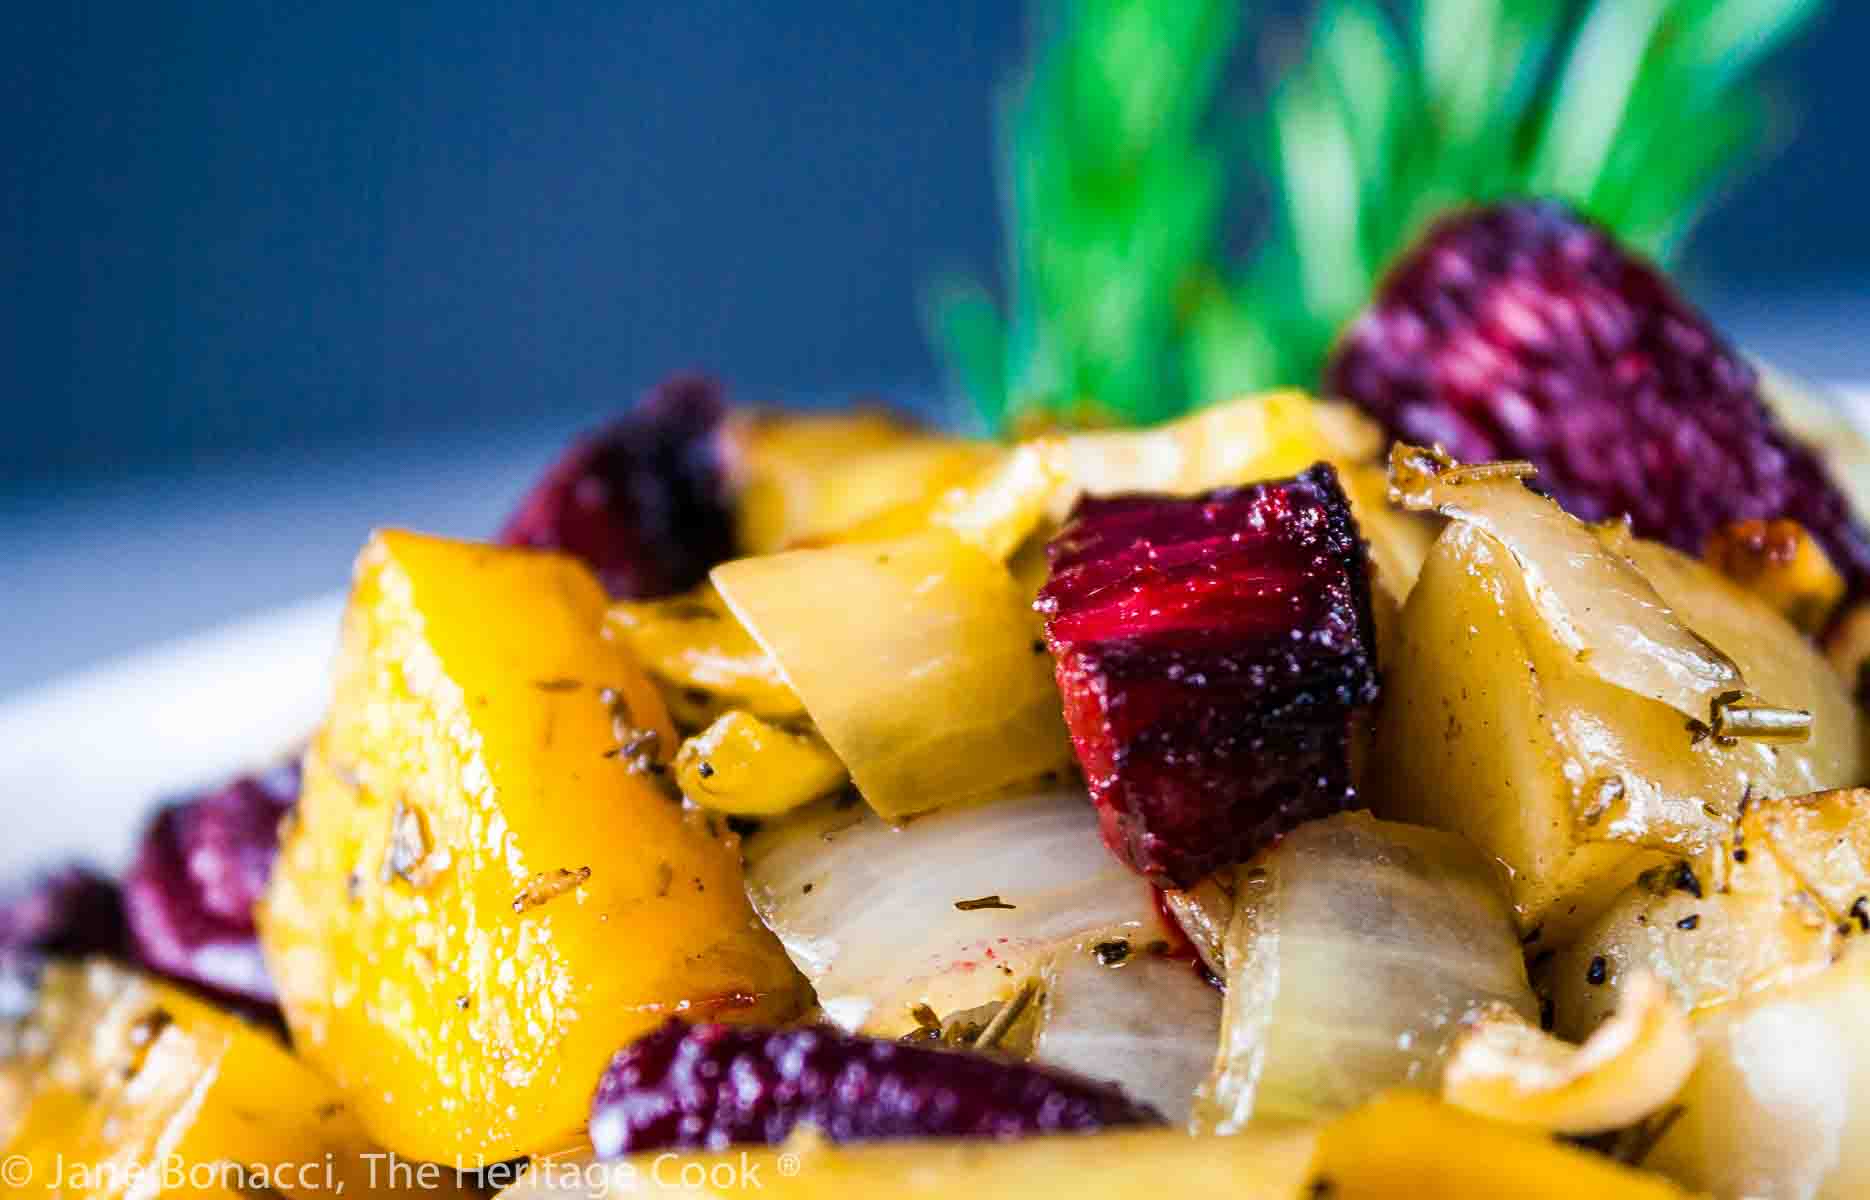 Rosemary roasted beets, potatoes, and peppers; This is a compilation of the top 15 Fan Favorites for 2023 on The Heritage Cook. Collected by Jane Bonacci, The Heritage Cook © 2023. 